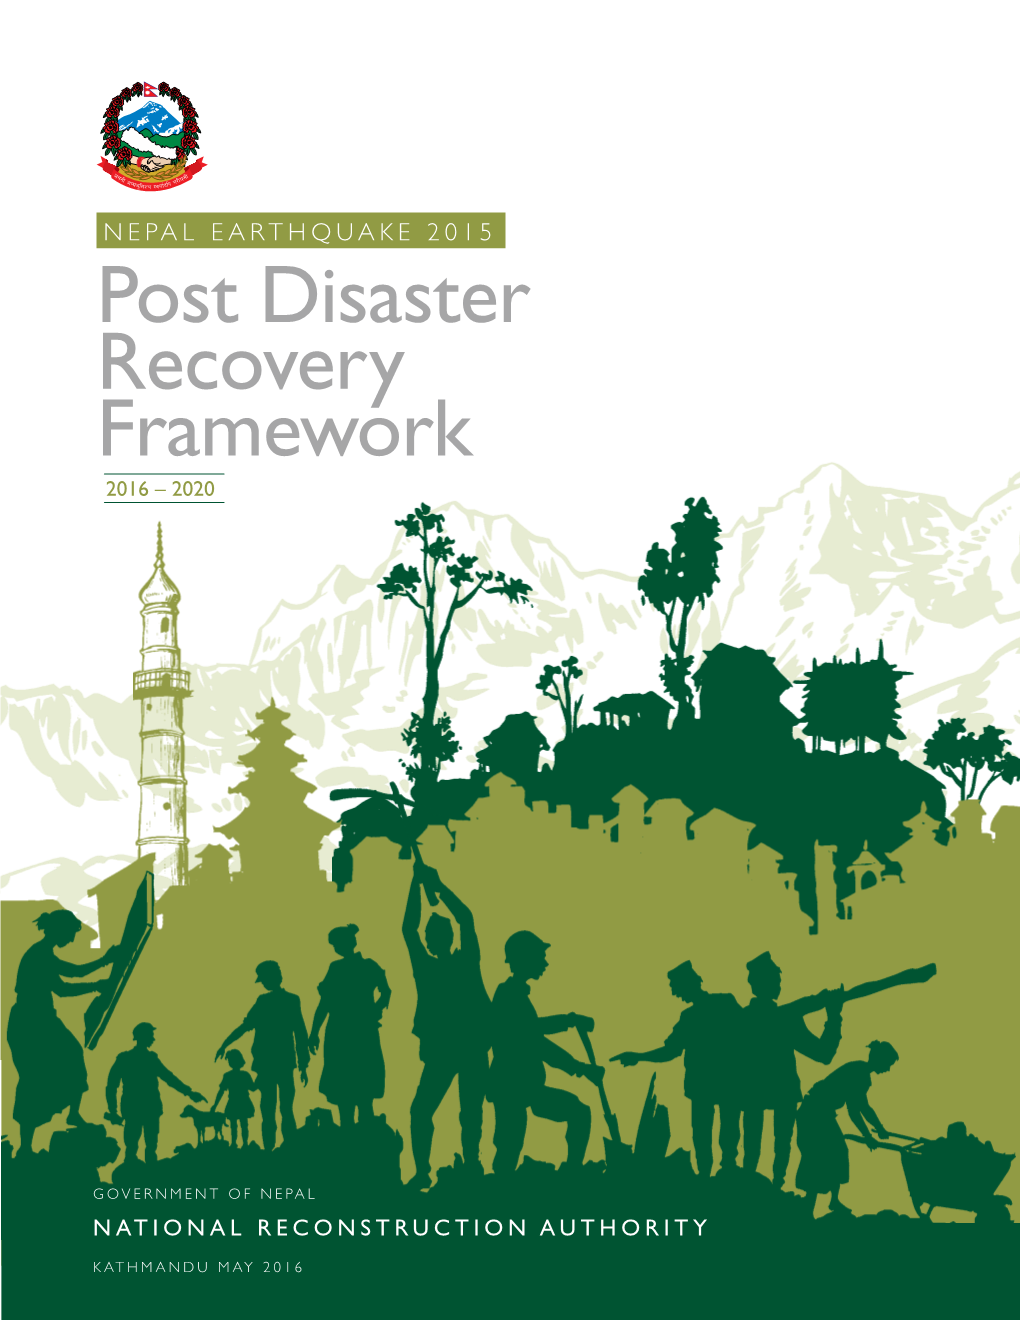 Nepal Earthquake 2015, Post Disaster Recovery Framework